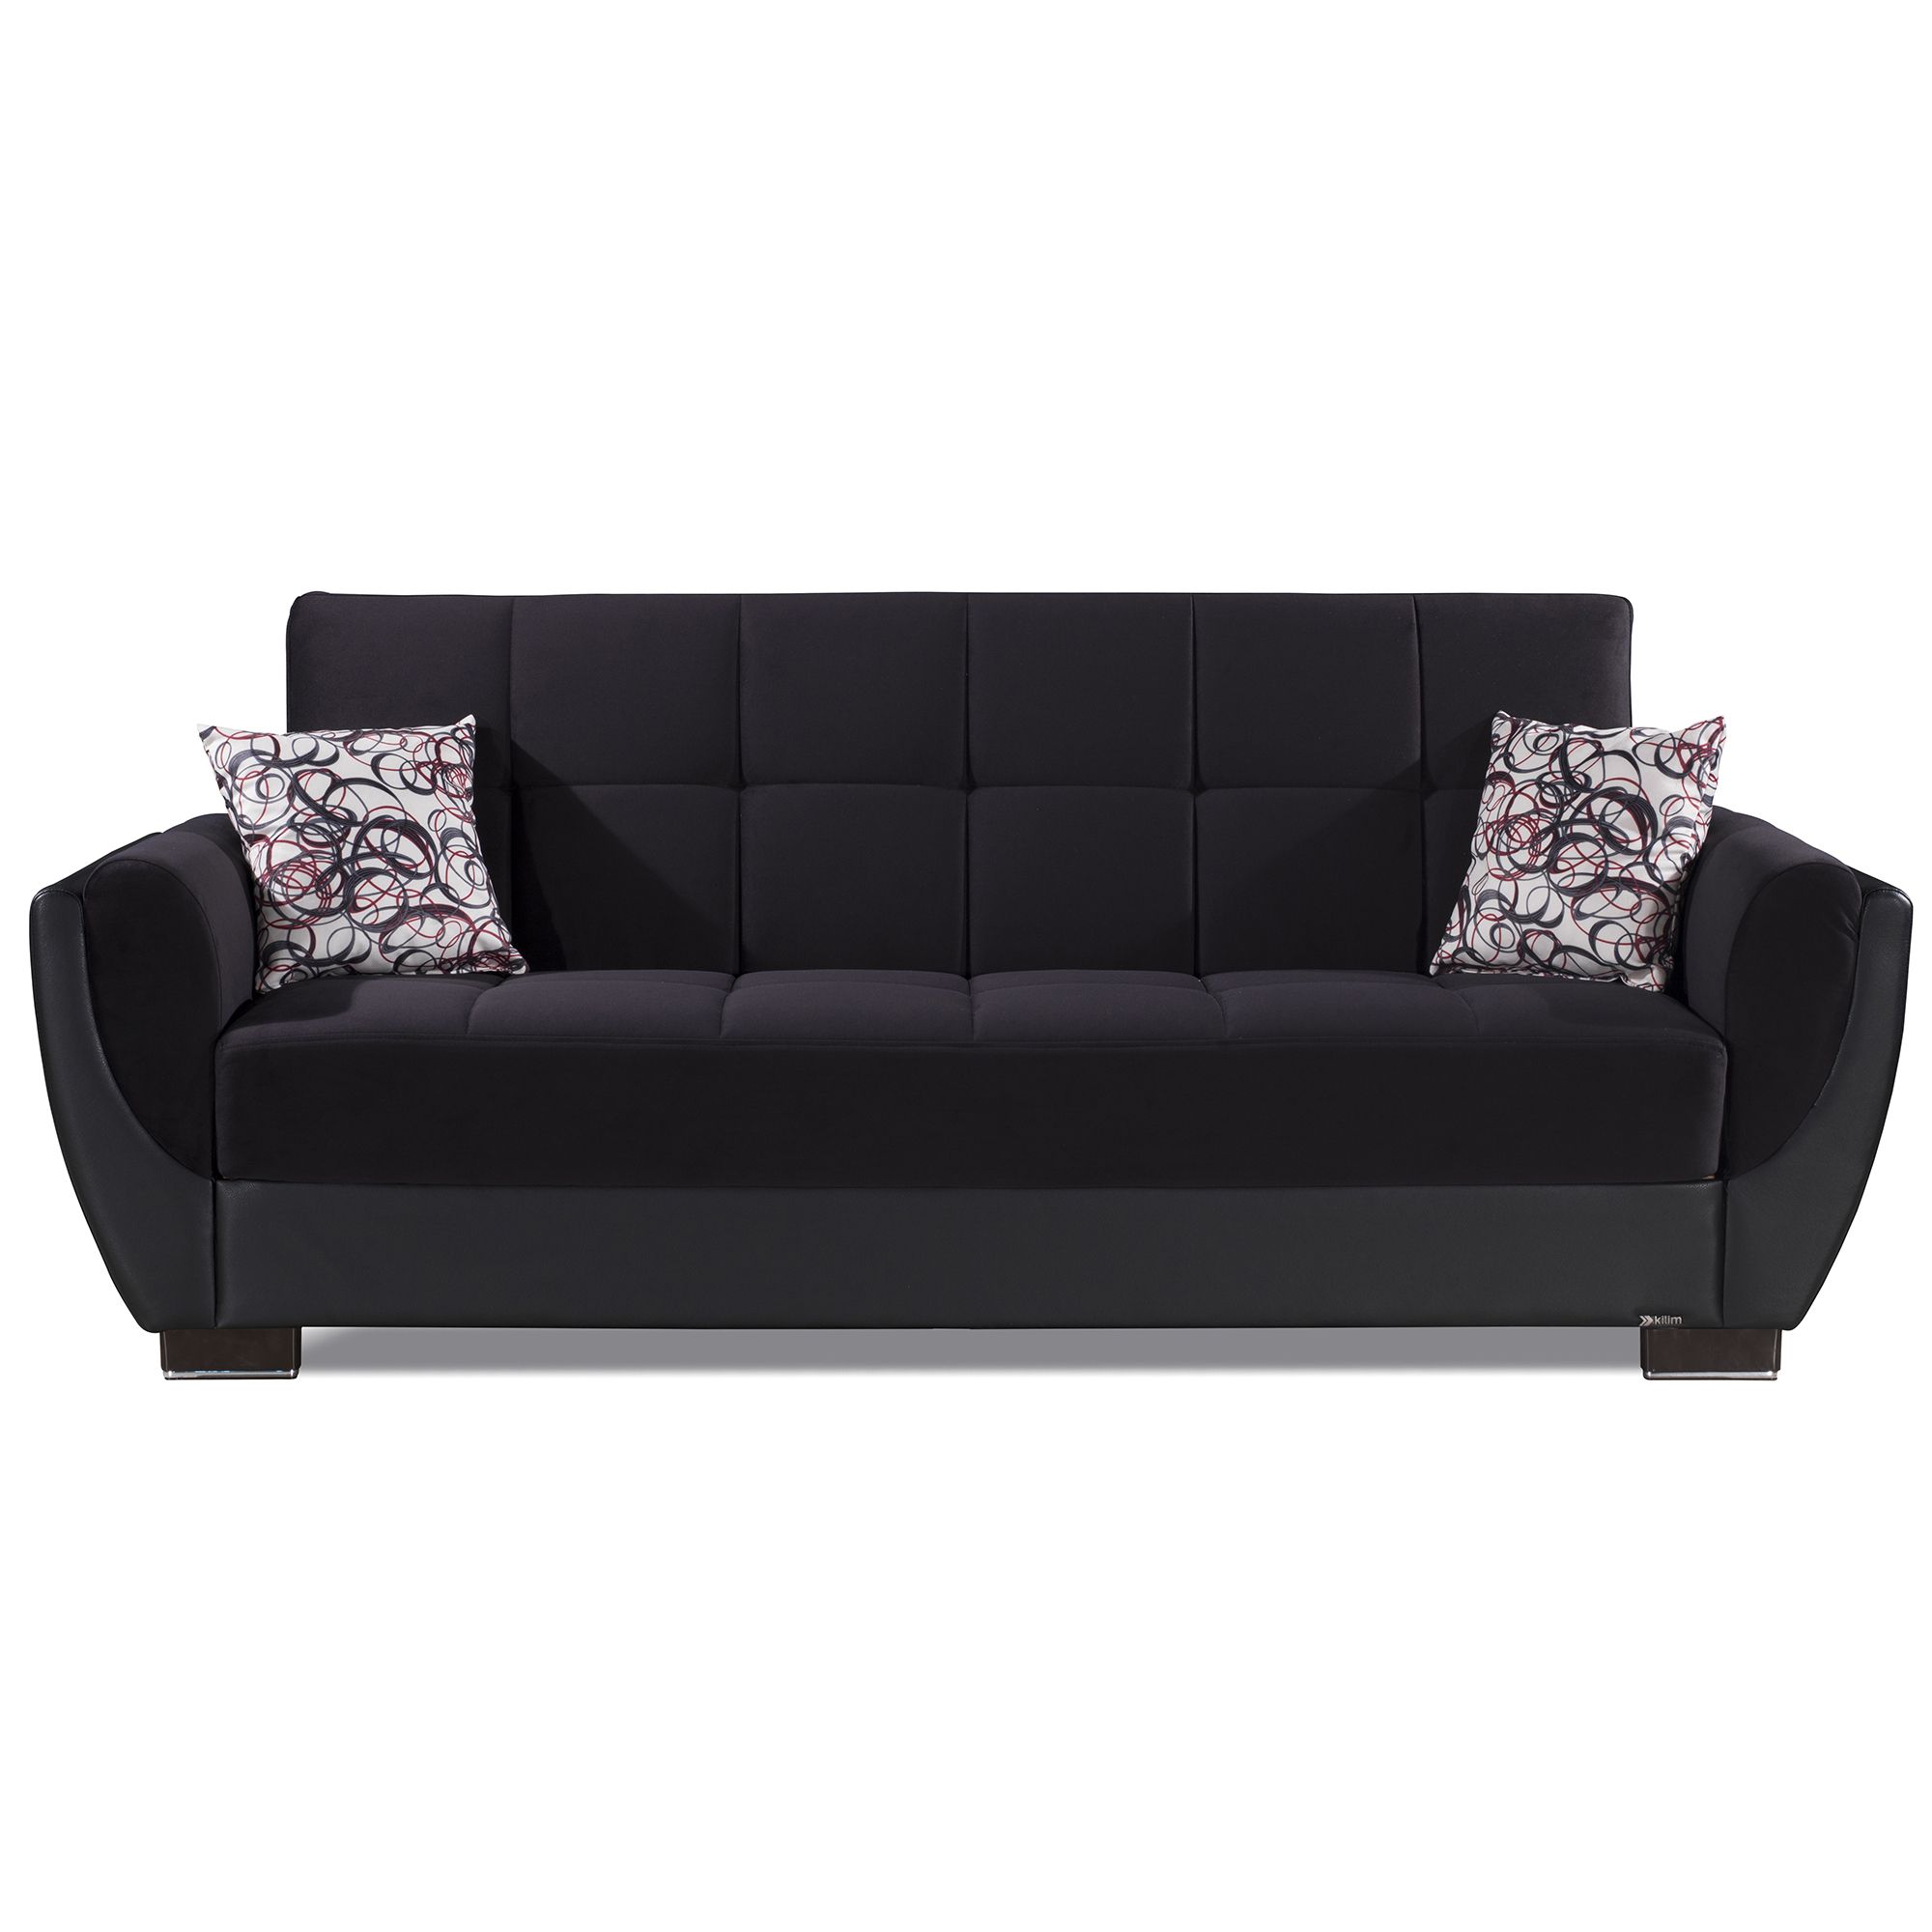 Ottomanson Armada Air Fabric Upholstery Sleeper Sofa Bed In Prato Storage Sectional Futon Sofas (View 6 of 15)